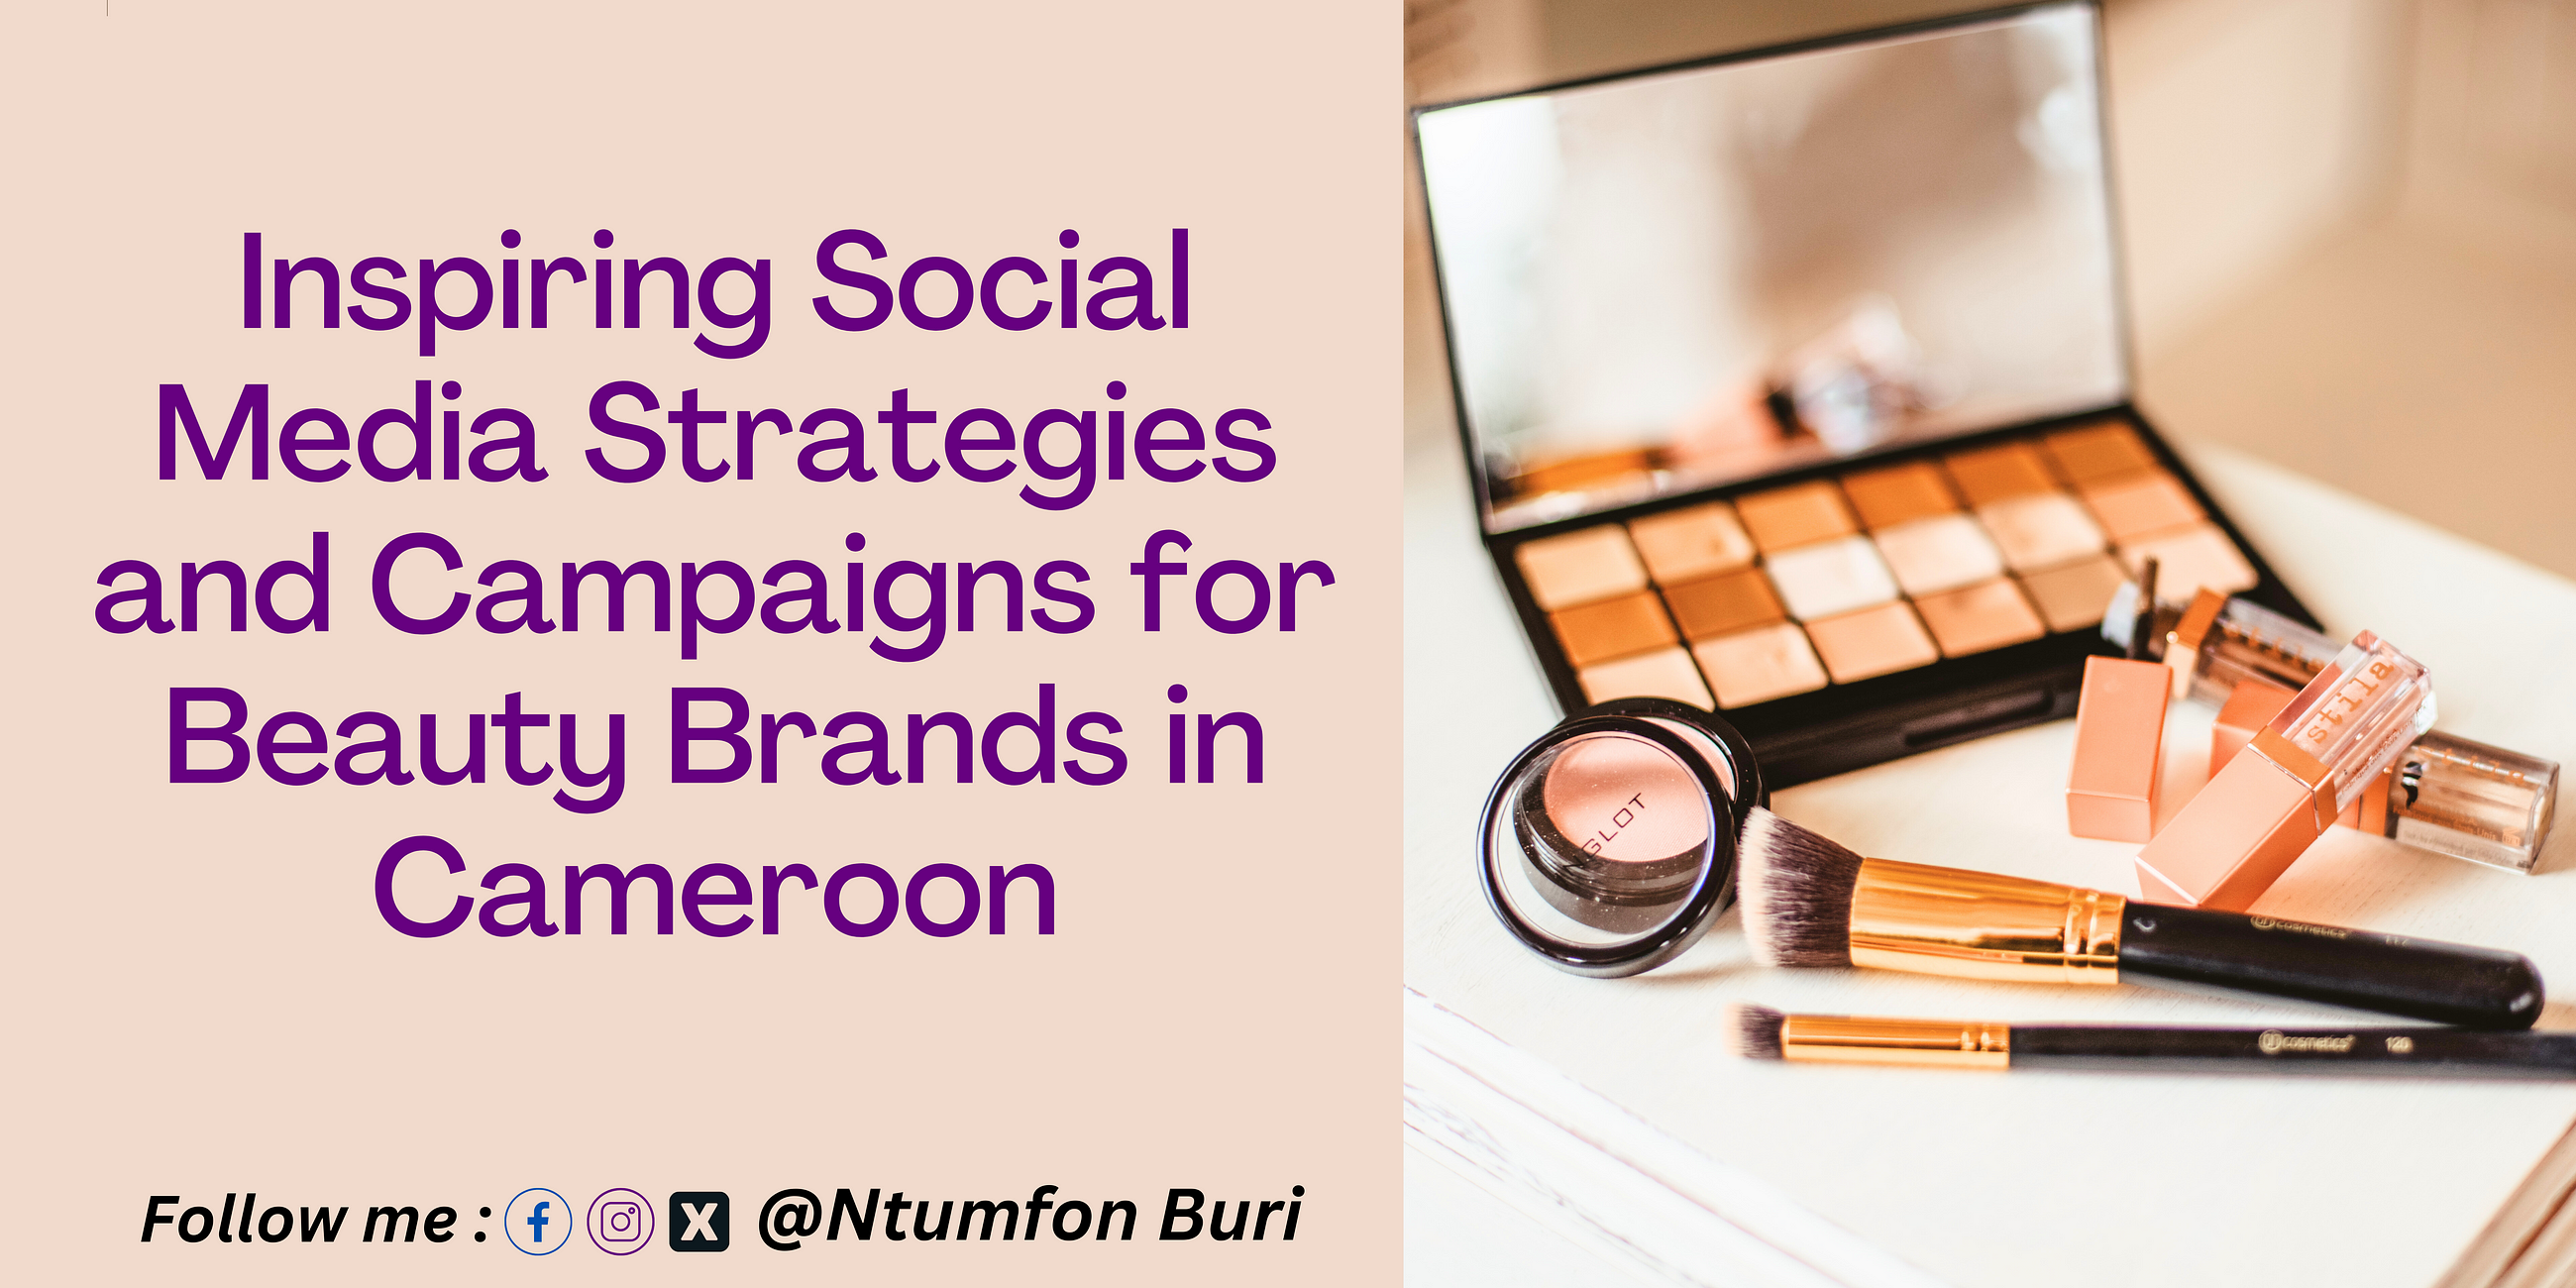 Inspiring Social Media Strategies and Campaigns for Beauty Brands in Cameroon